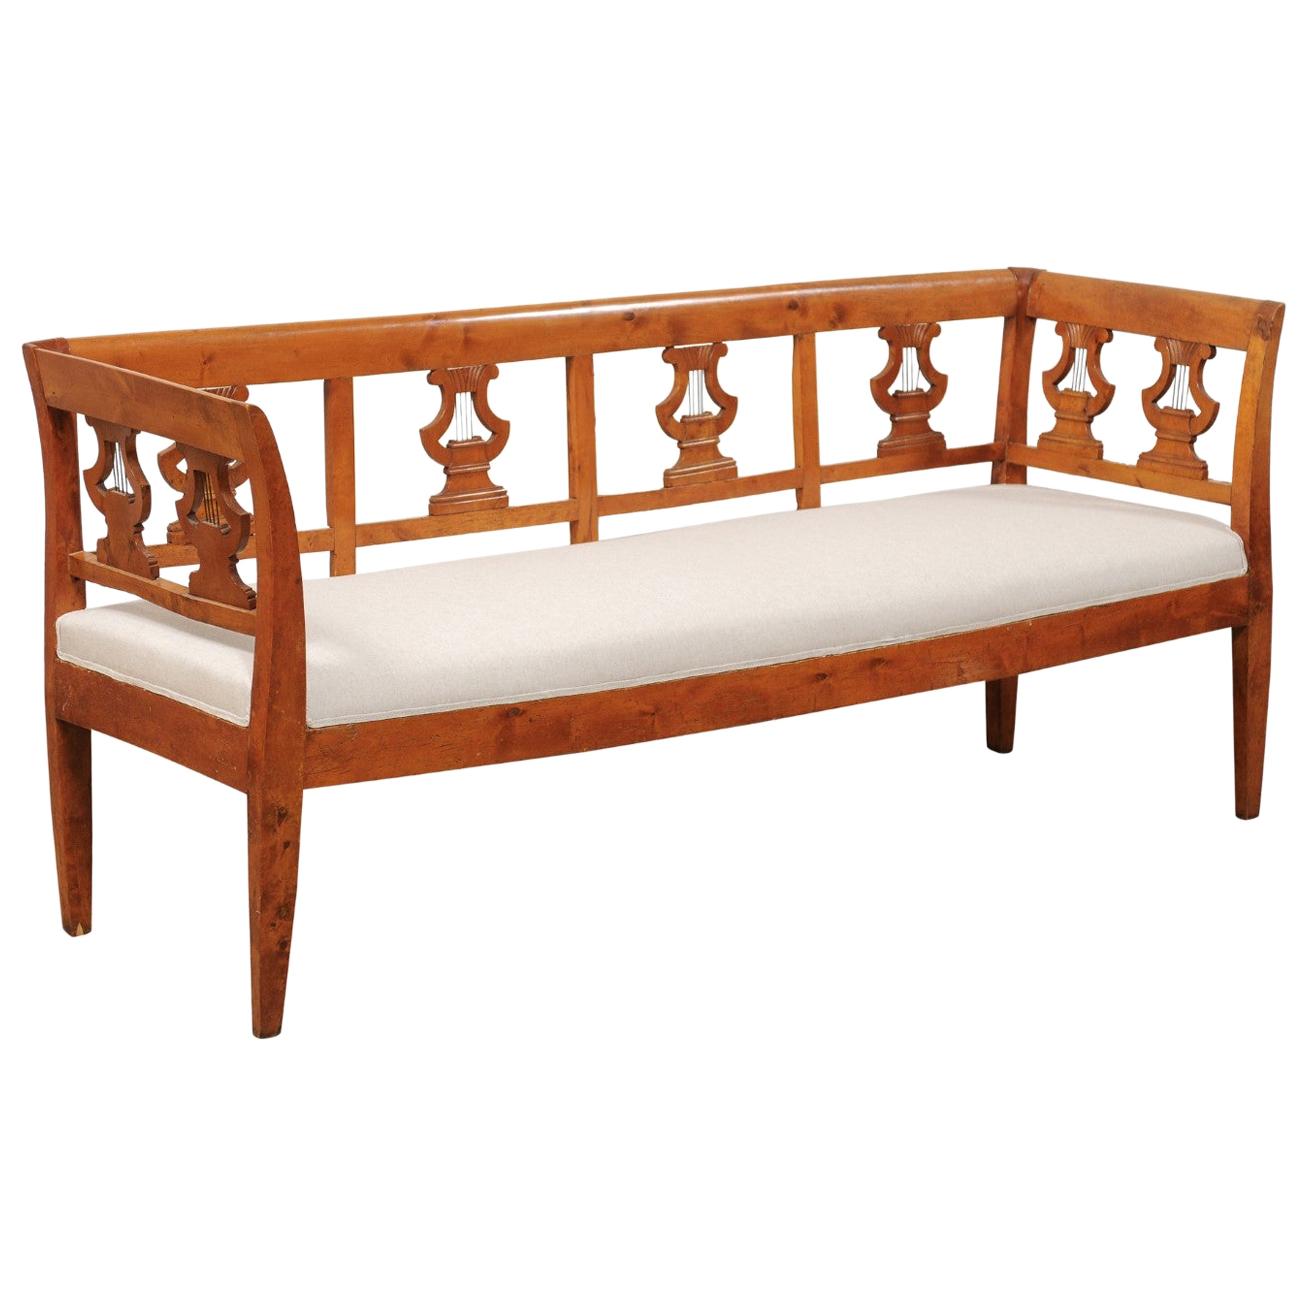 Swedish Neoclassical Style Birchwood Sofa Bench with Lyre Carvings, Mid-19th C